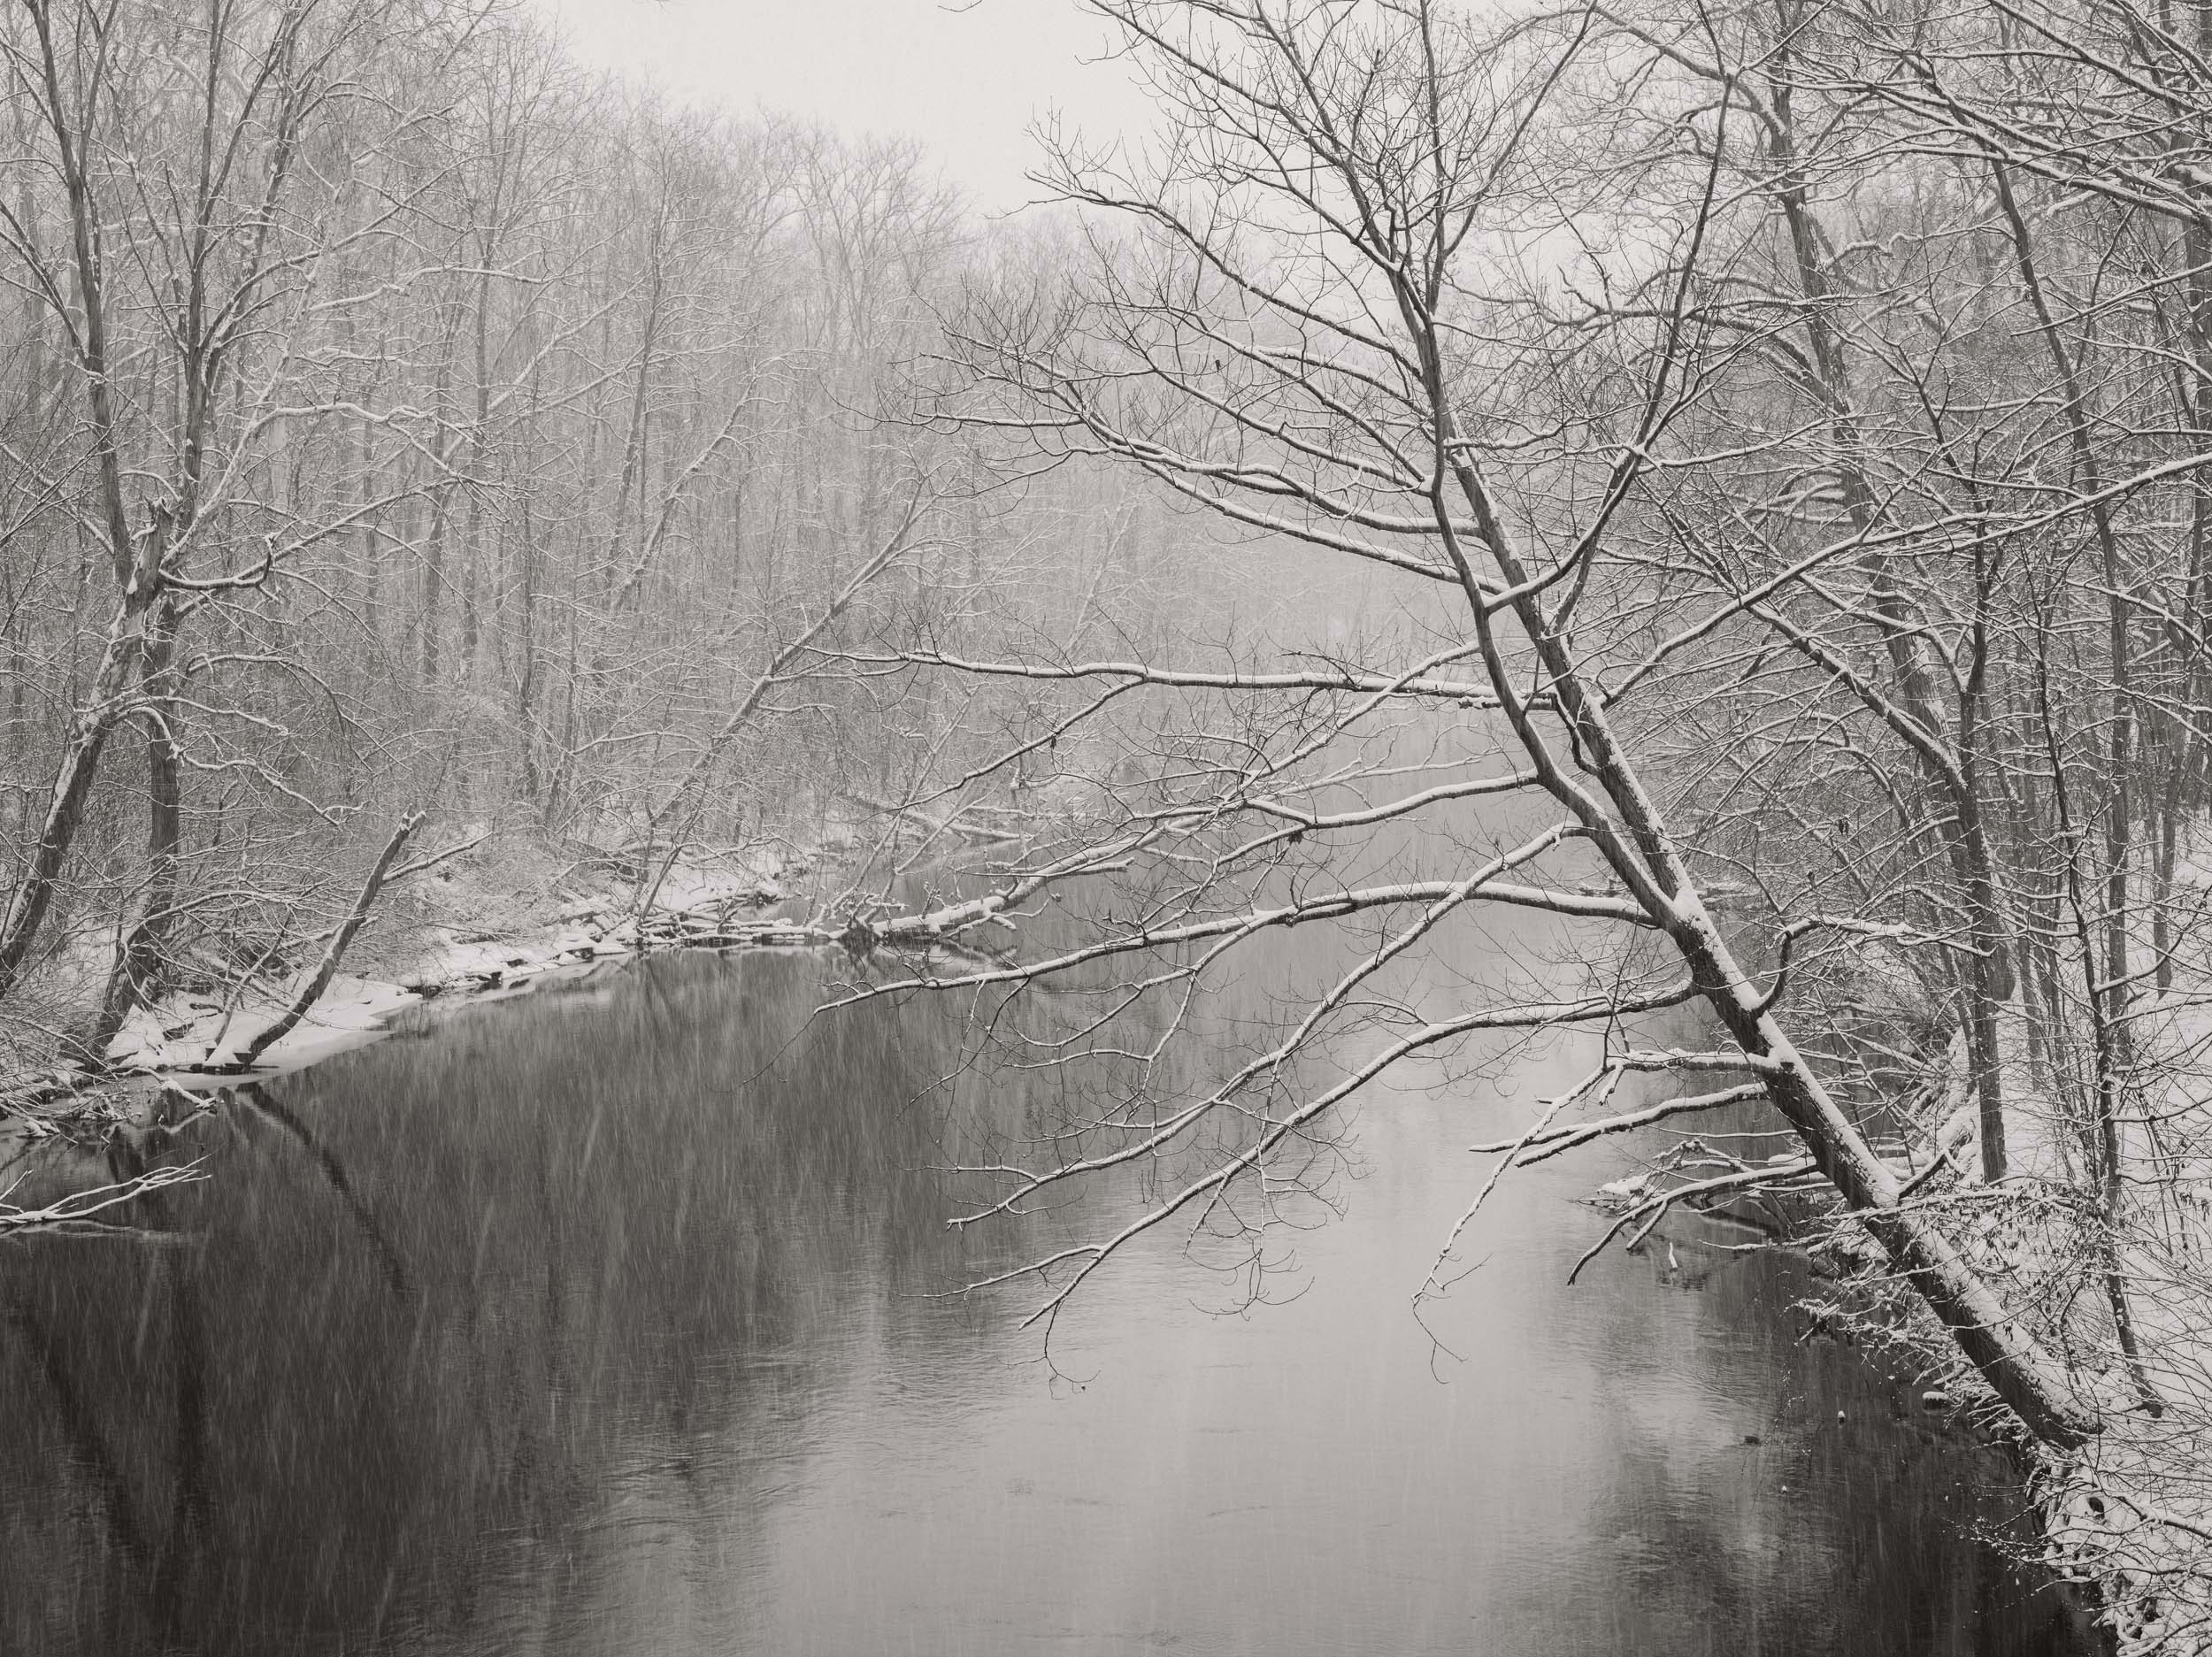 RIVER IN WINTER. On this wintry day I brought out my camera and took a drive down Haggerty into the lower Huron Metro Park looking for something beautiful to share. Michigan Landscape Photography. 